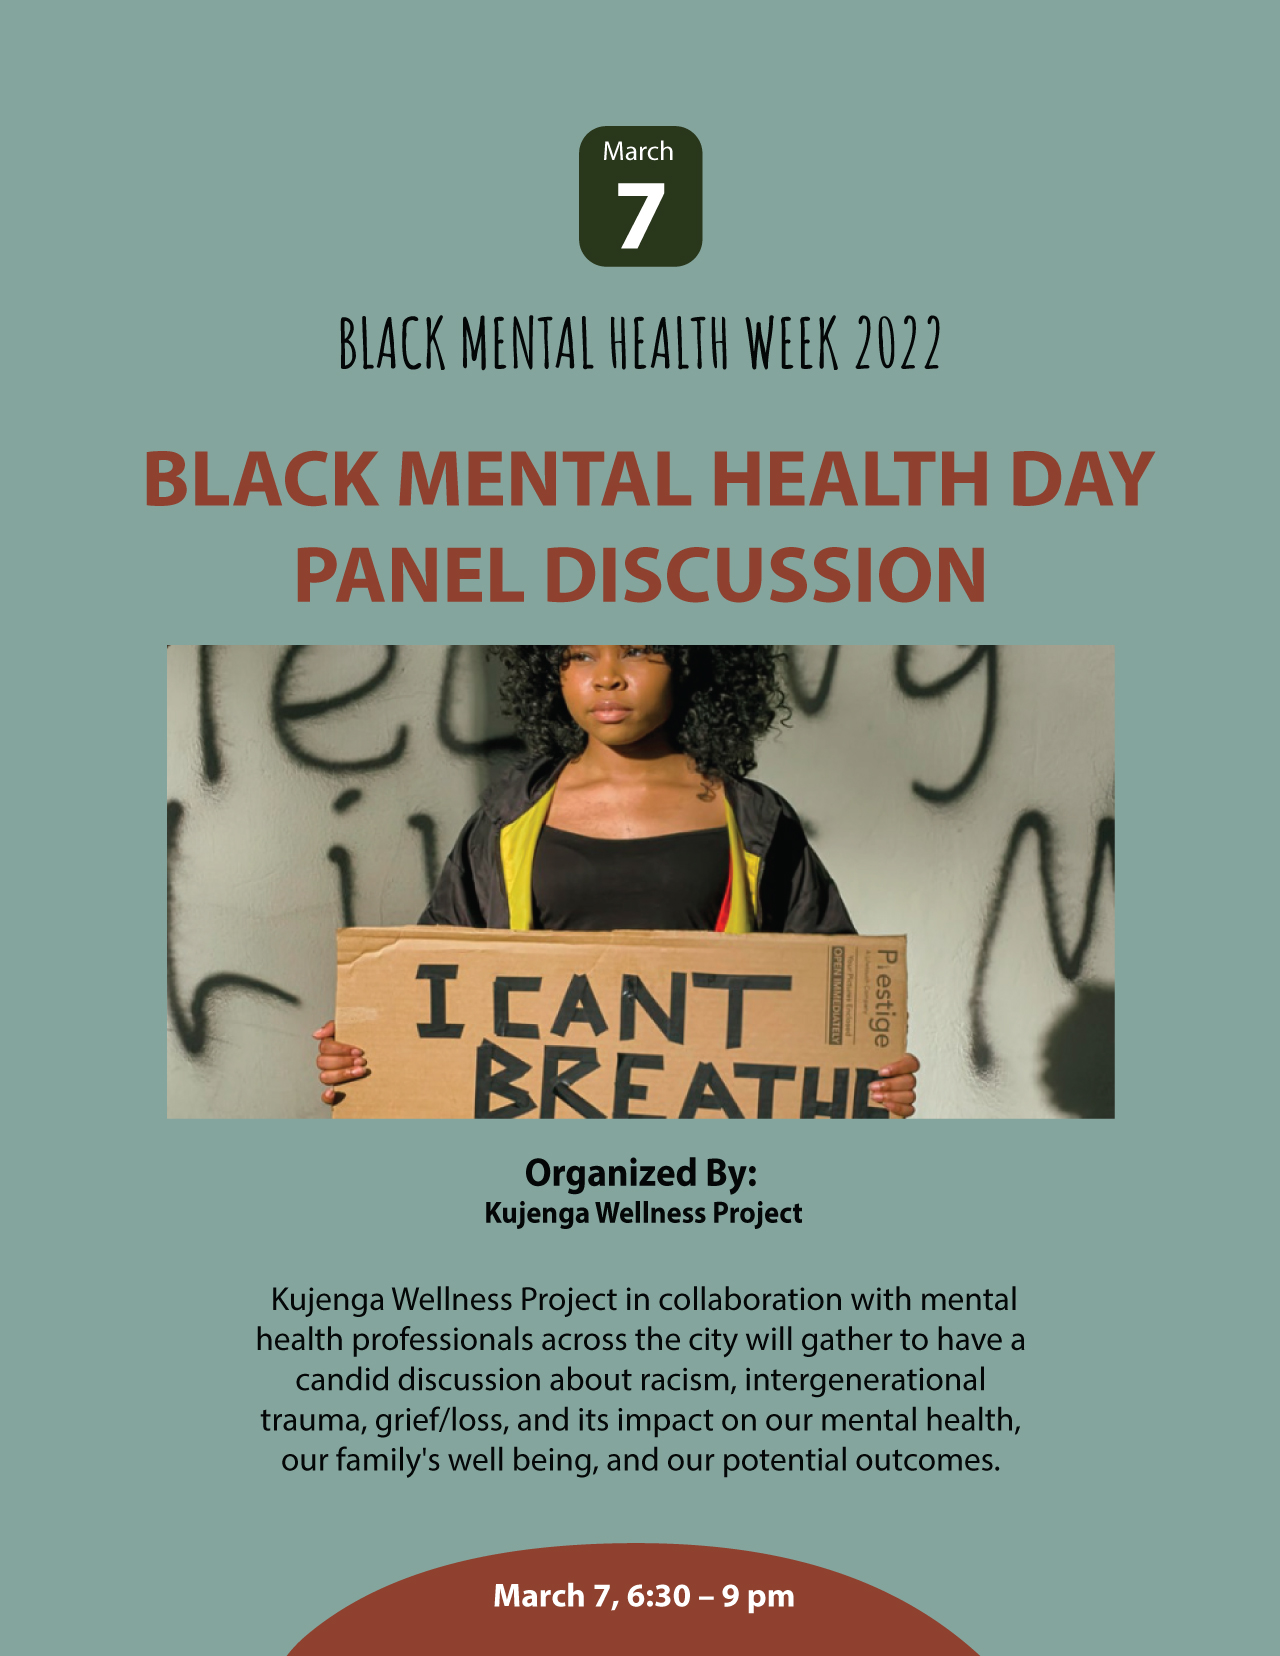 Black Mental Health Day Panel Discussion